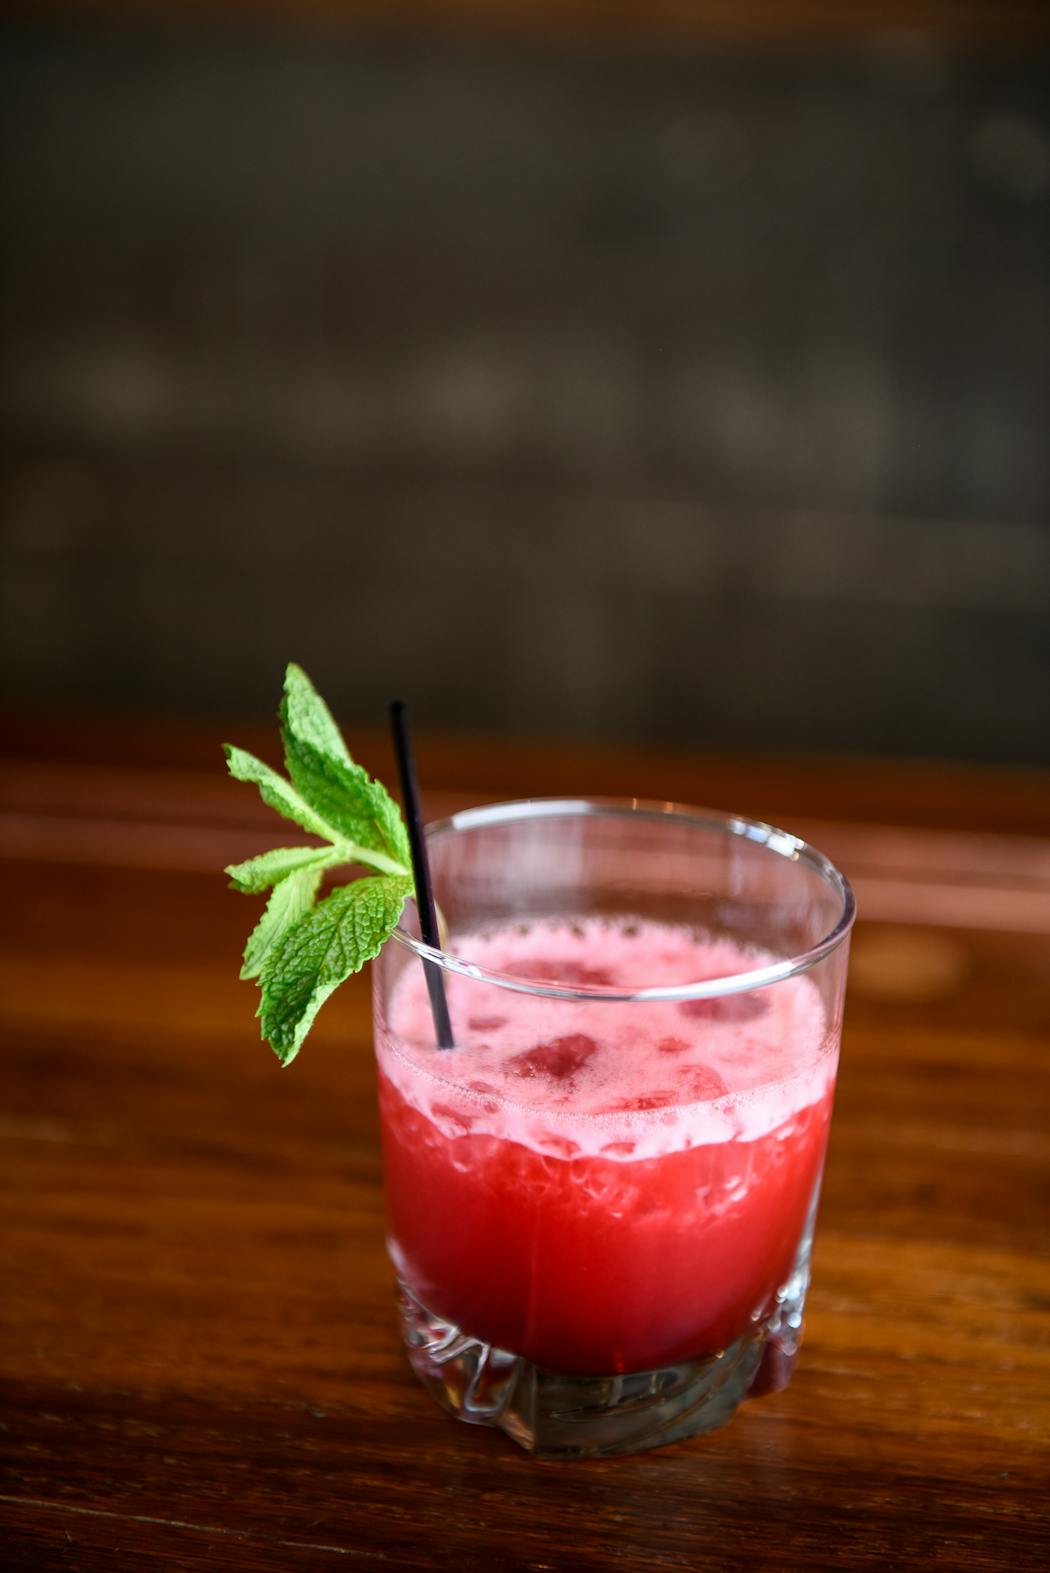 A whiskey-rhubarb cocktail at Vikre Distillery.